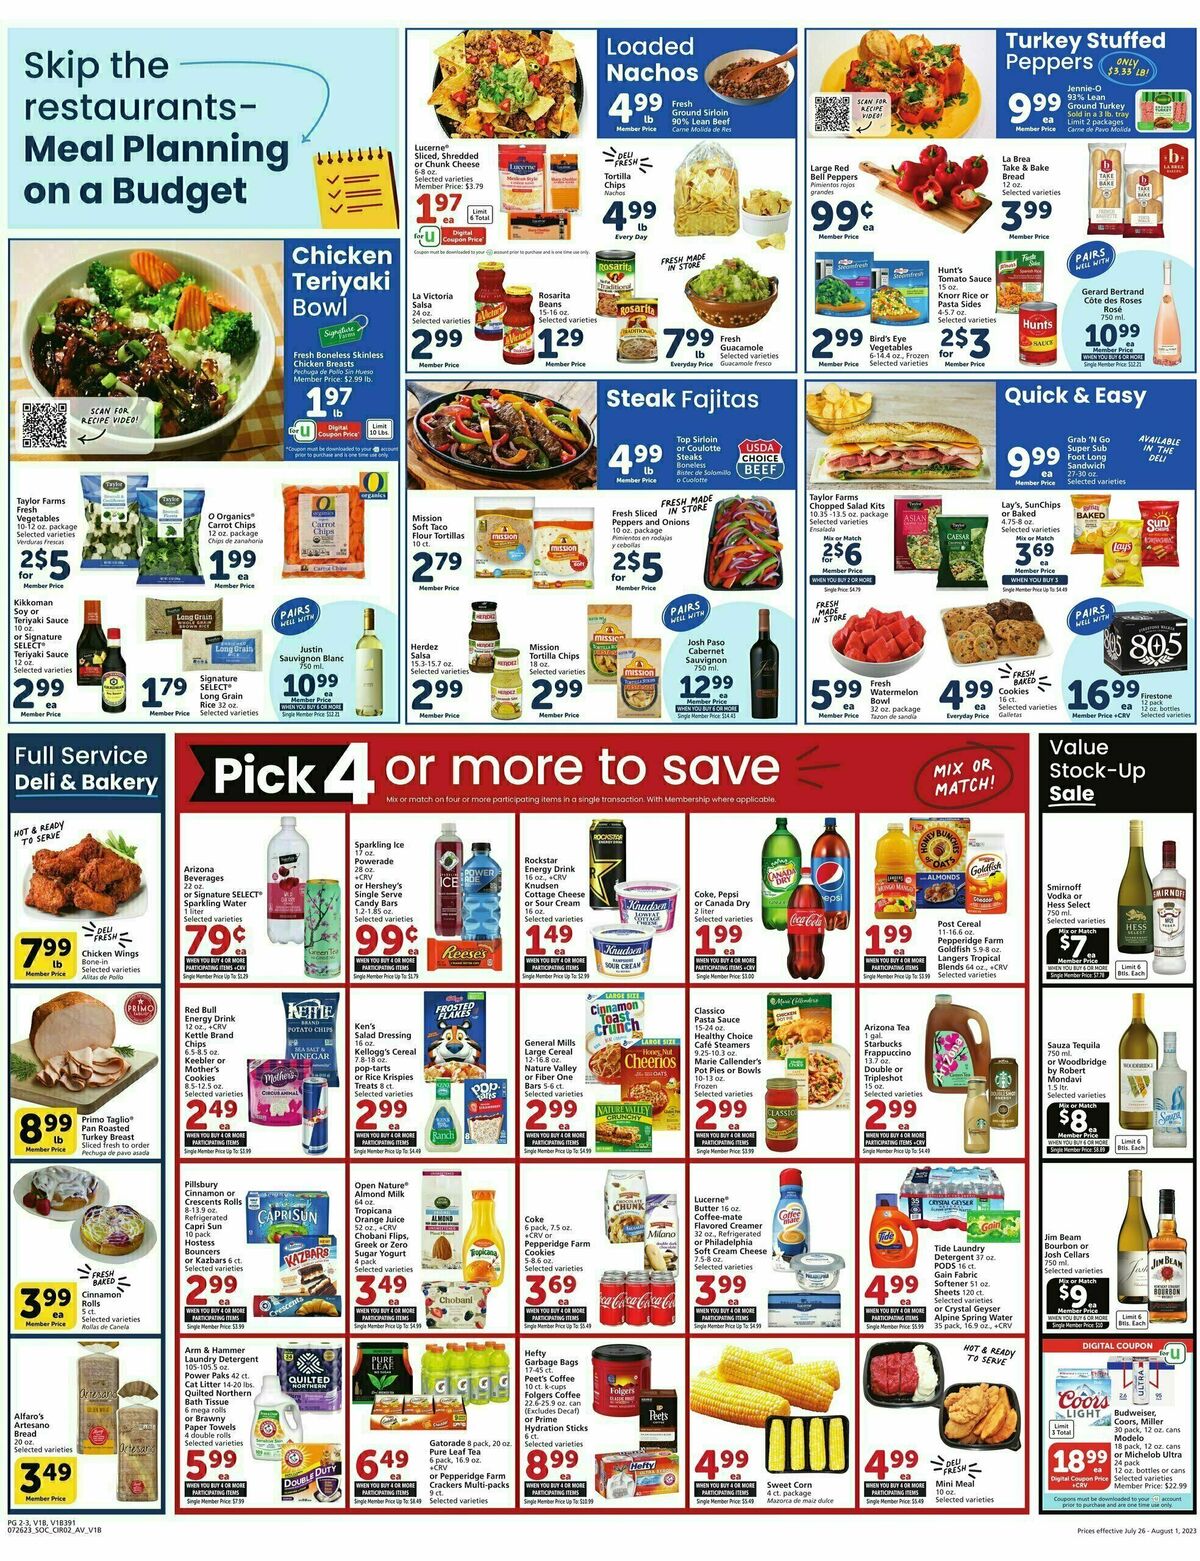 Vons Weekly Ad from July 26